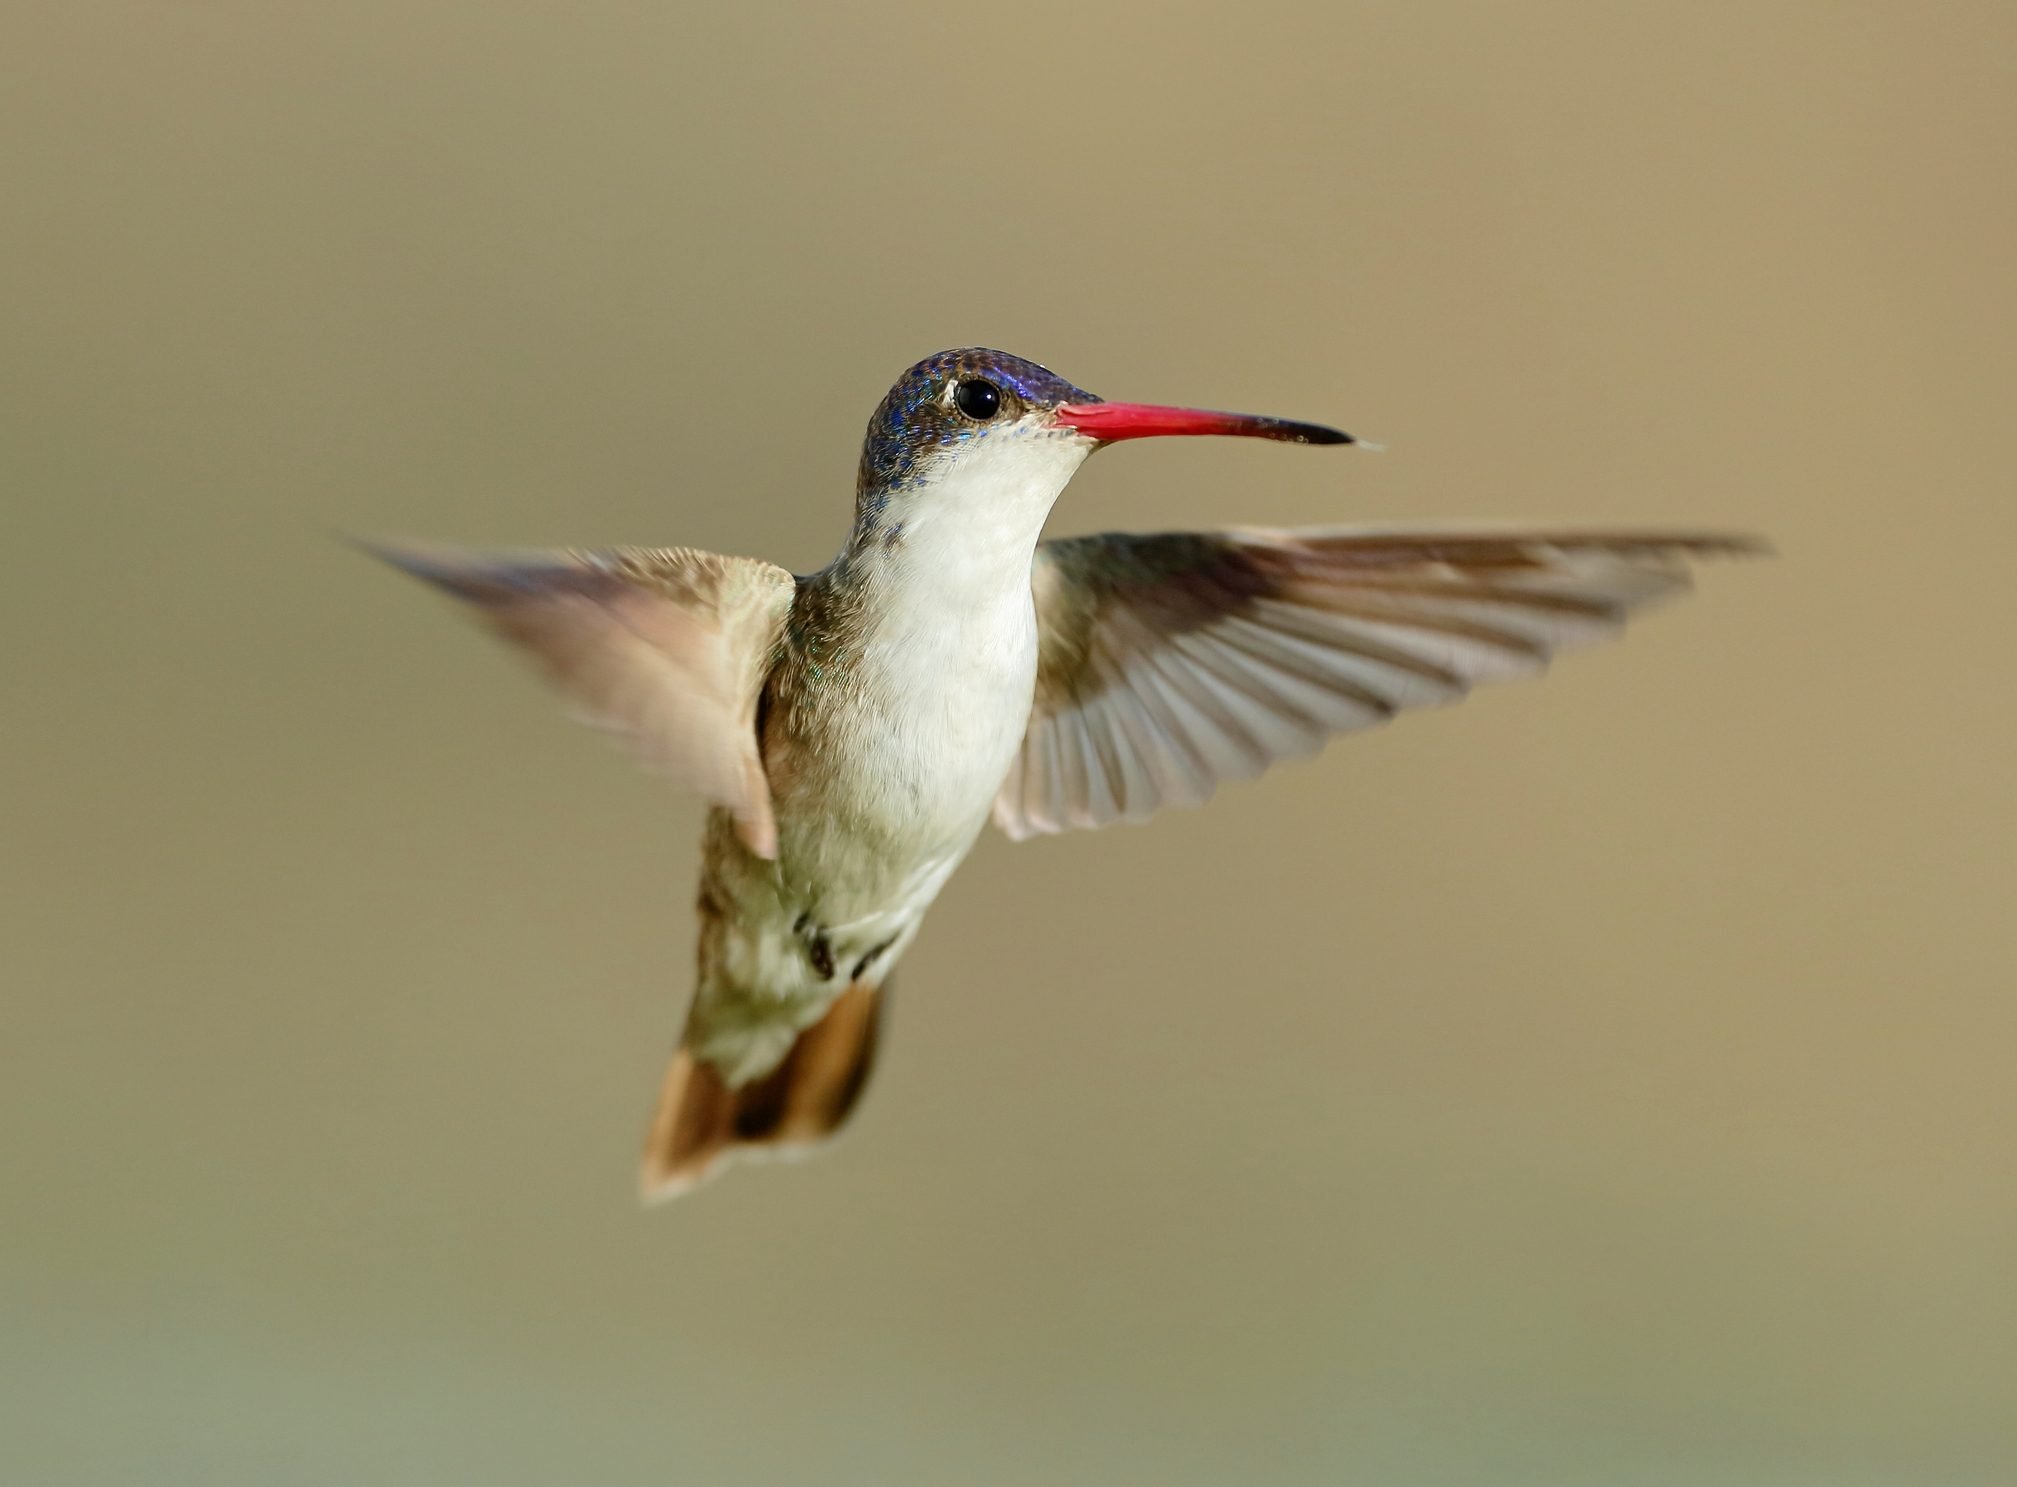 See a Violet-Crowned Hummingbird in the Southwest